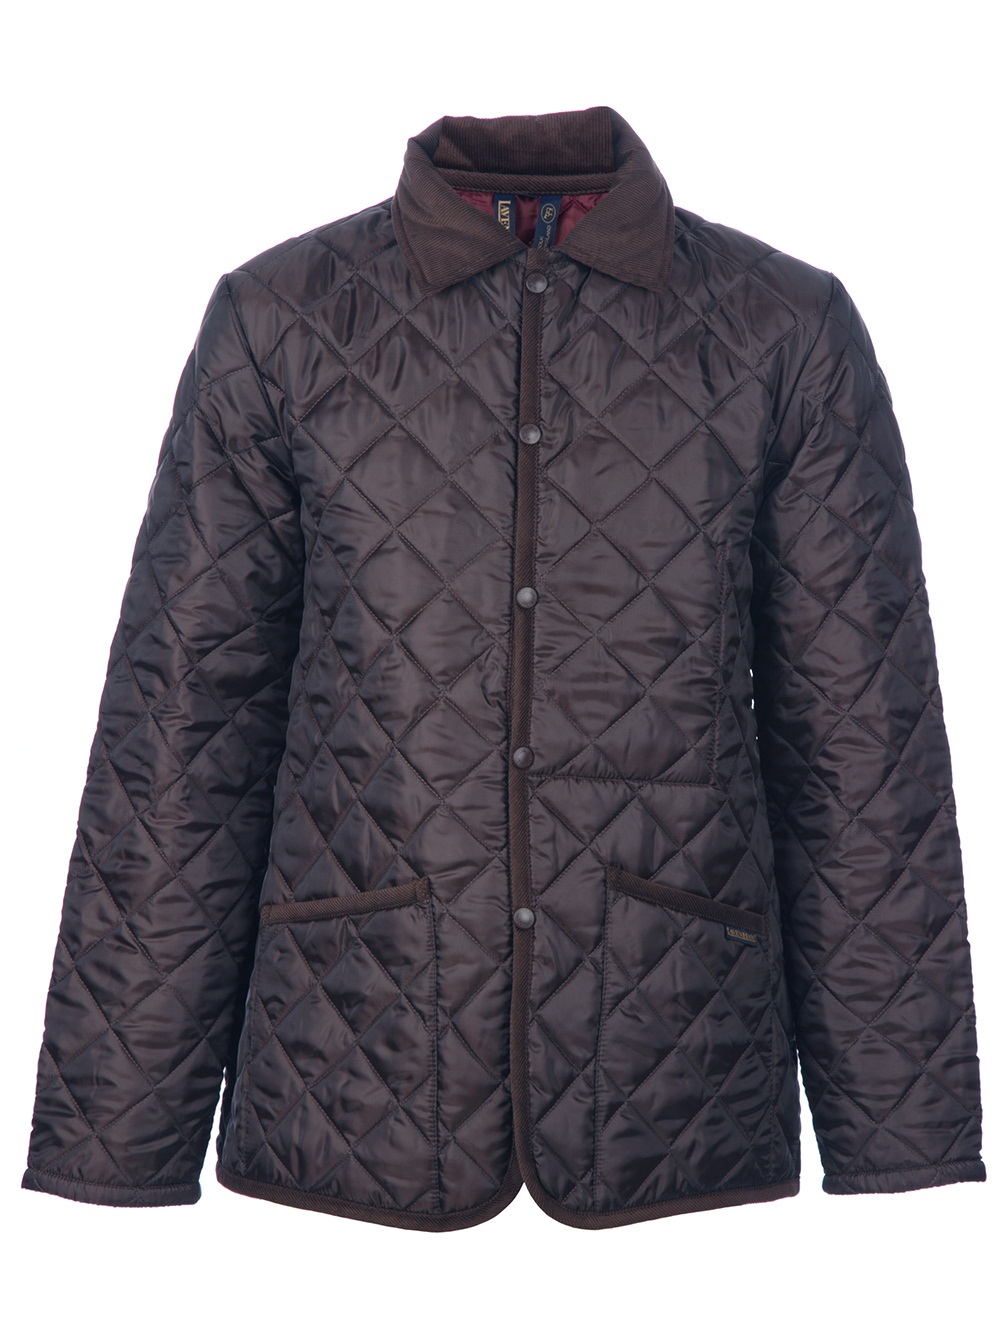 Lavenham Quilted Jacket in Brown for Men - Lyst